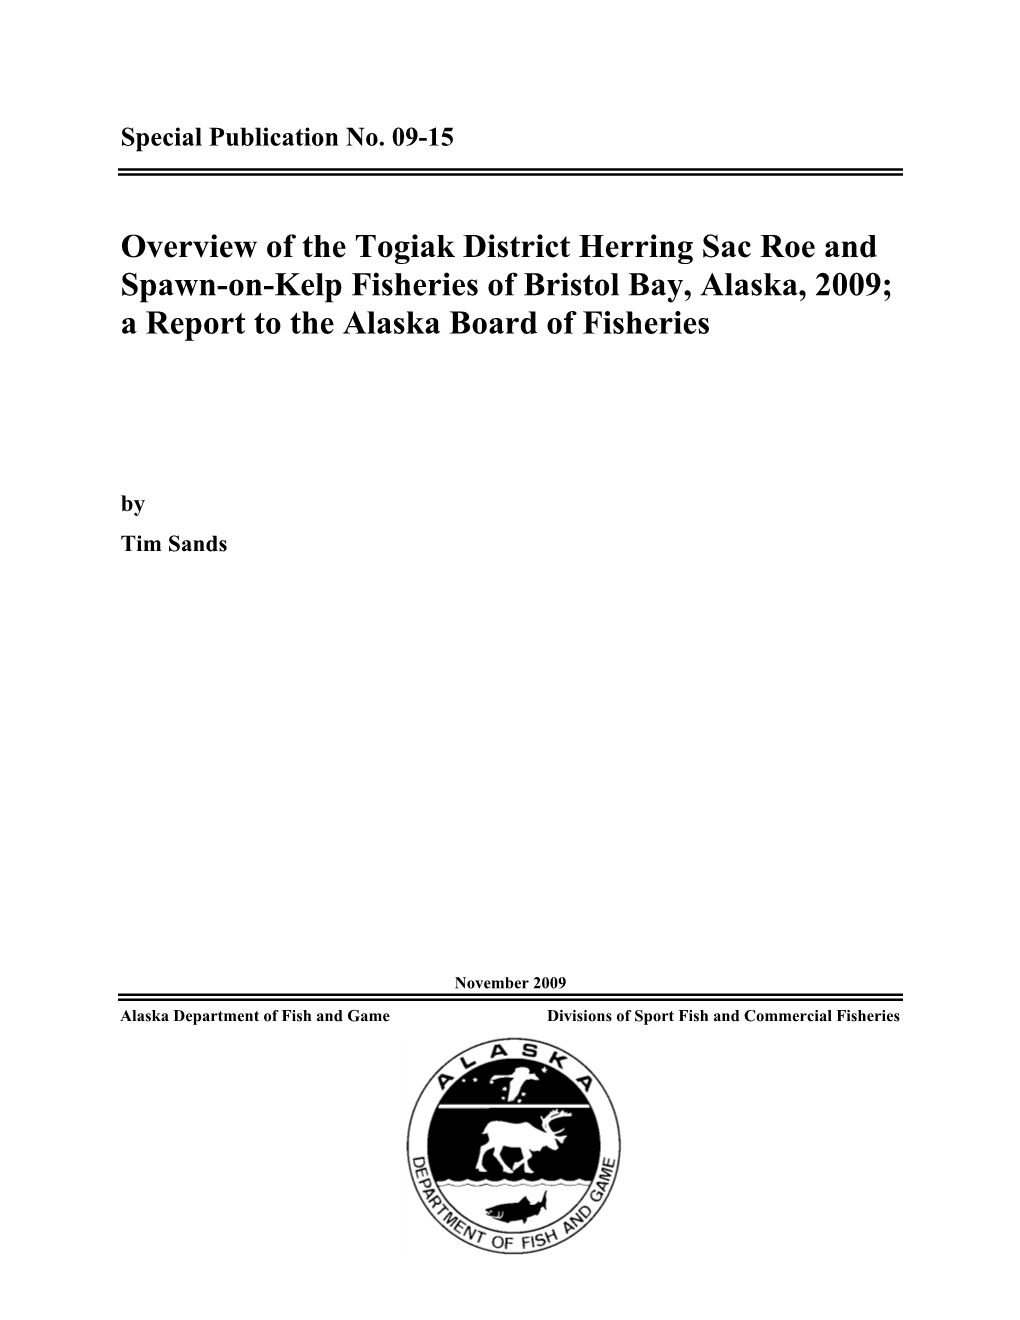 Overview of the Togiak District Herring Sac Roe and Spawn-On-Kelp Fisheries of Bristol Bay, Alaska, 2009; a Report to the Alaska Board of Fisheries